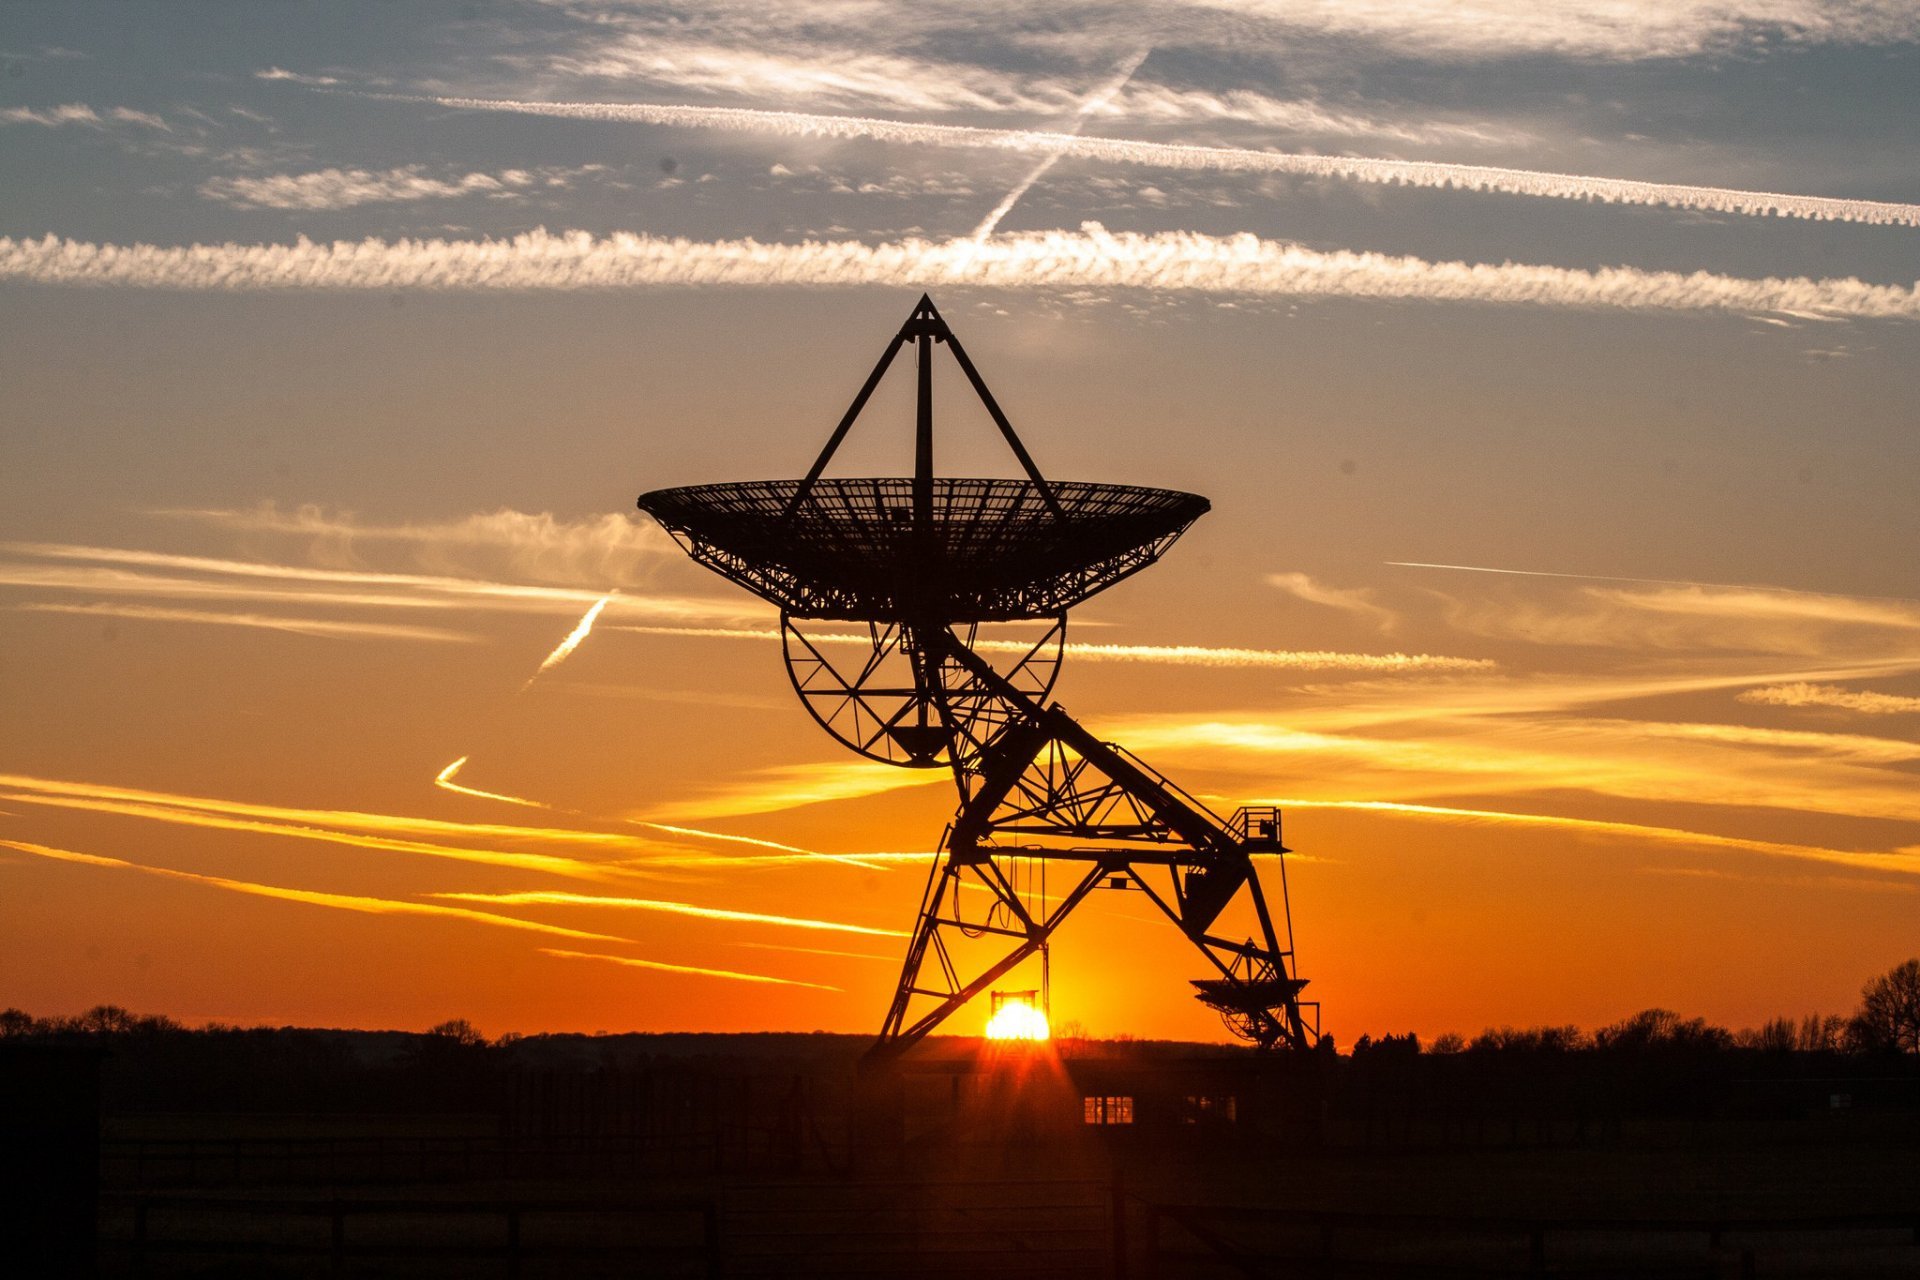 dish antenna admission played silhouette frame sky clouds dawn ...